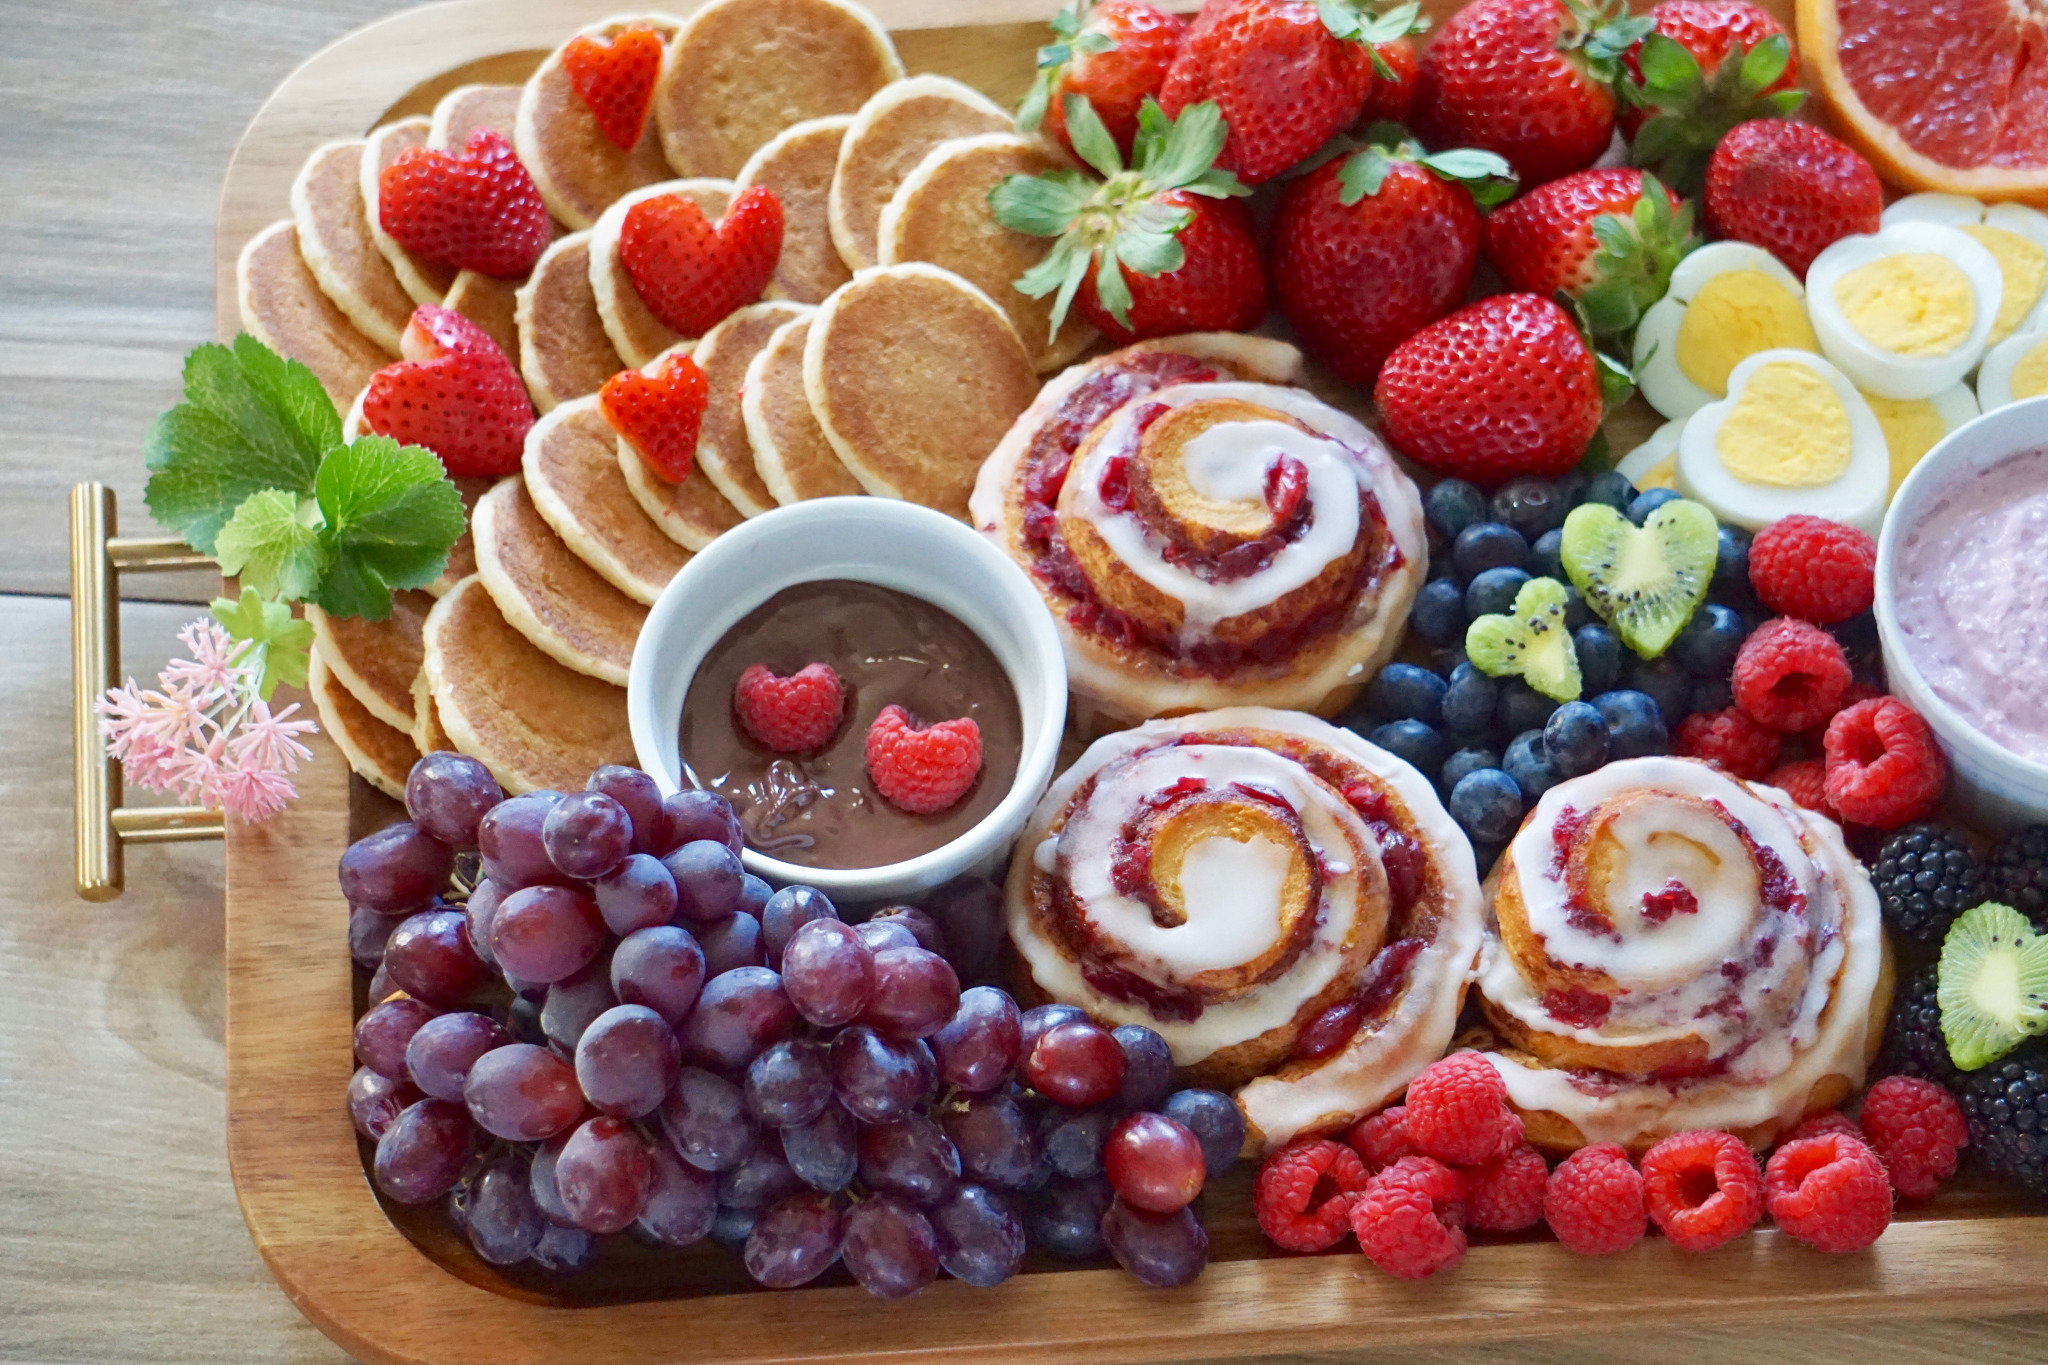 Toppings for your Valentine's breakfast board